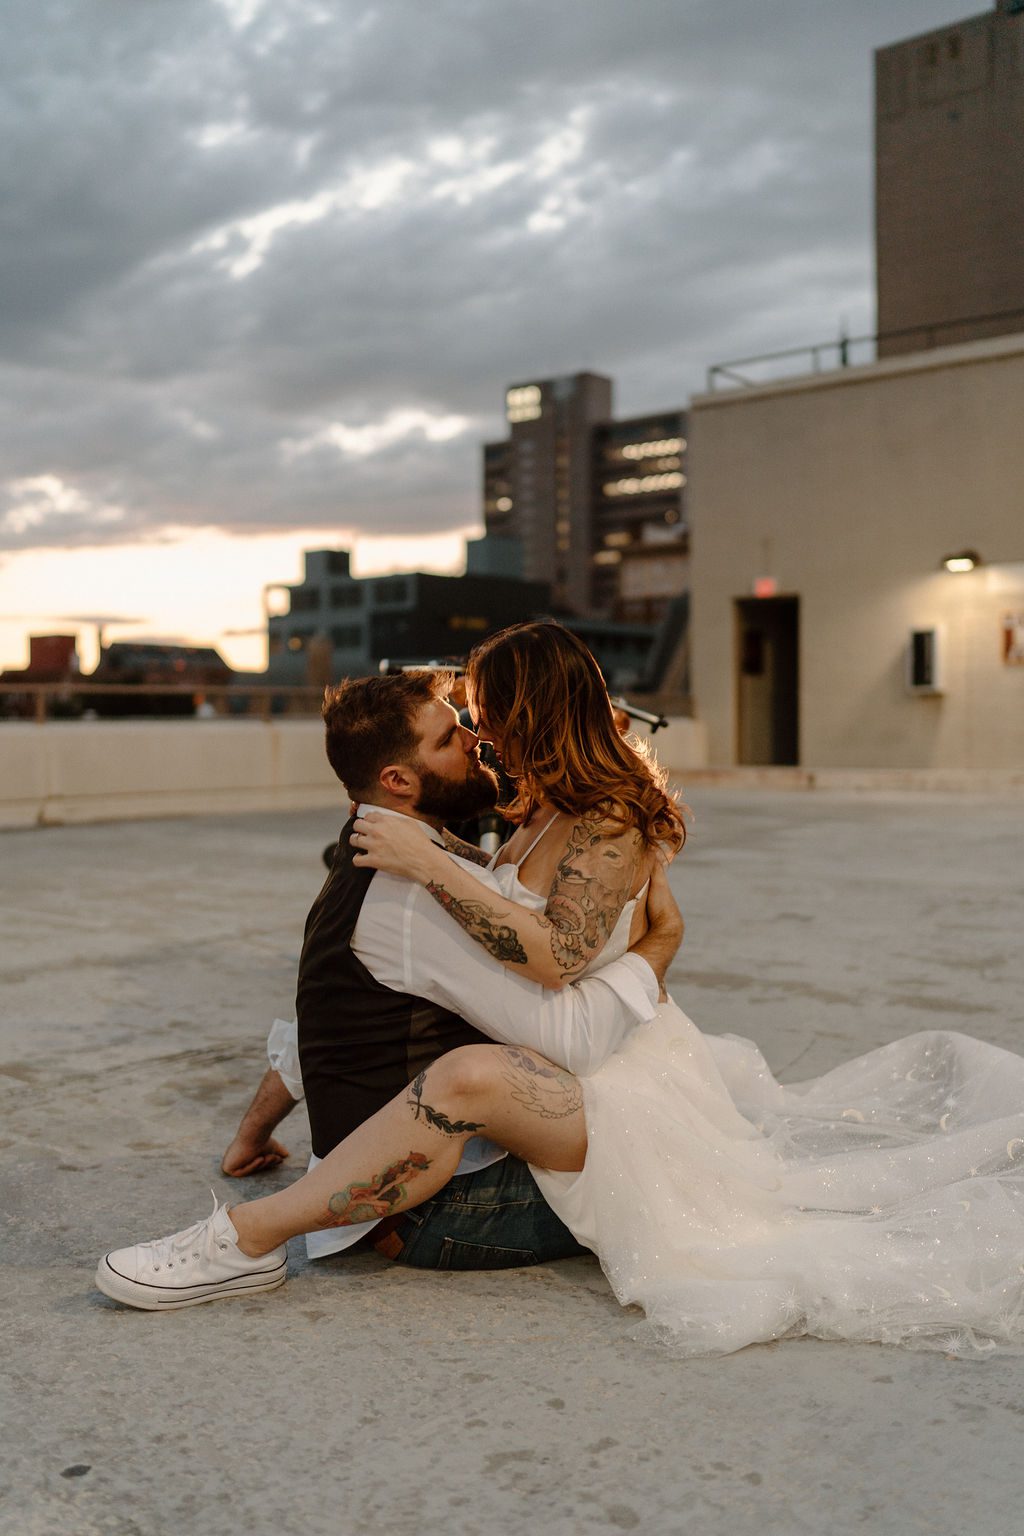 fun urban city elopement With Motorcycle on rooftop